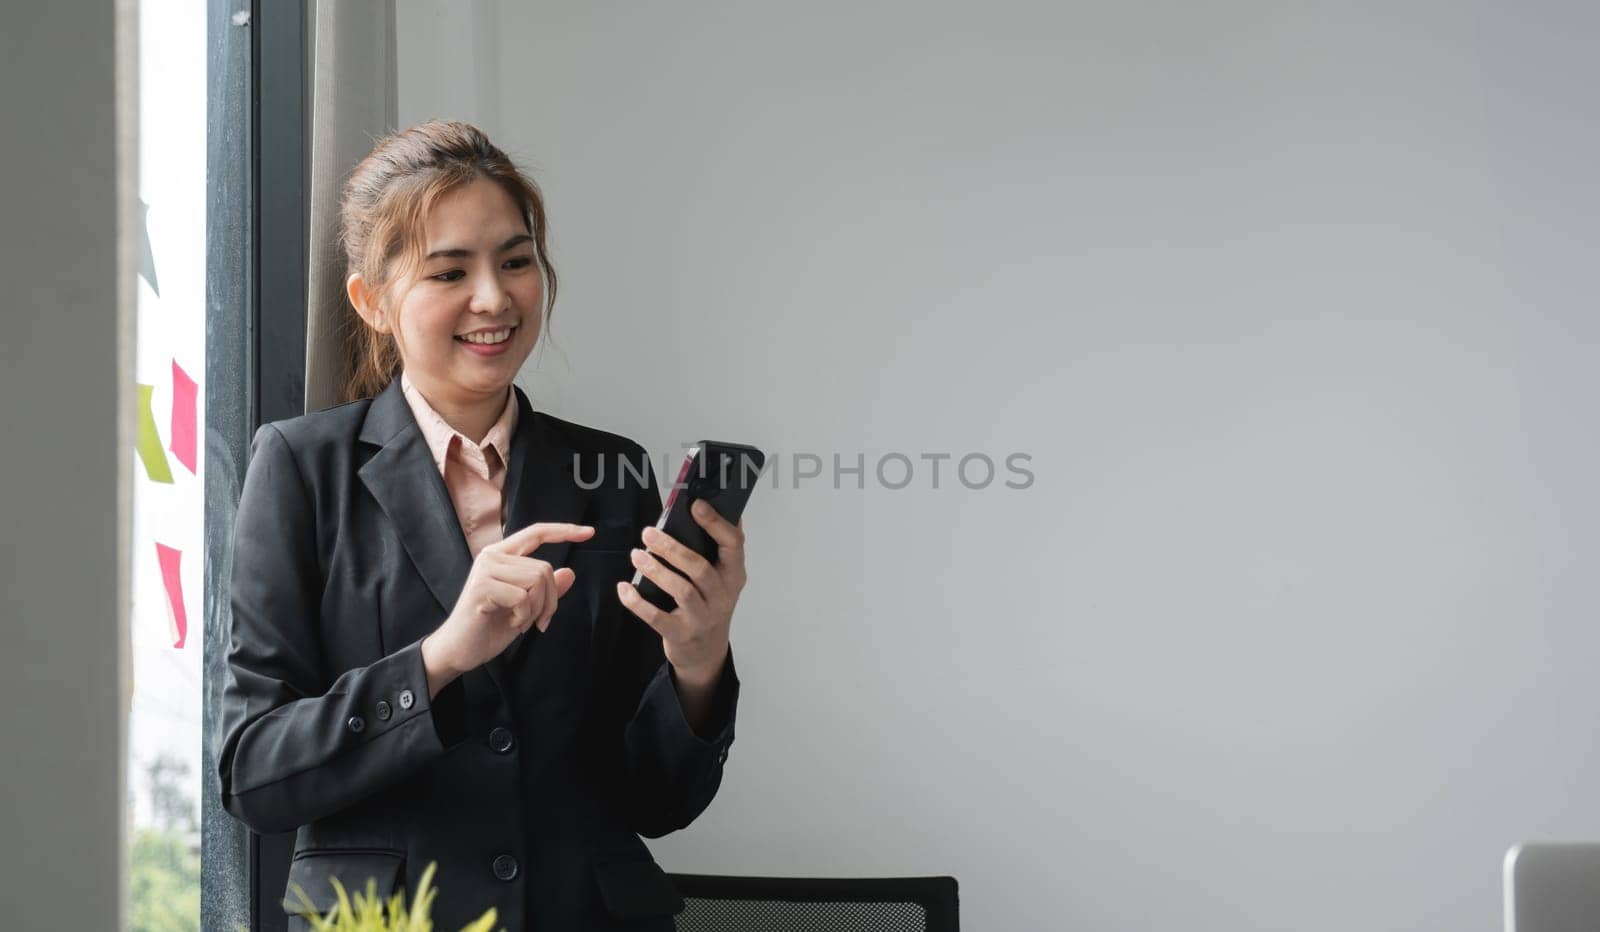 Beautiful business woman in the office, happy and smiling business woman uses internet phone close up, female worker reads message and browses internet pages inside office building.